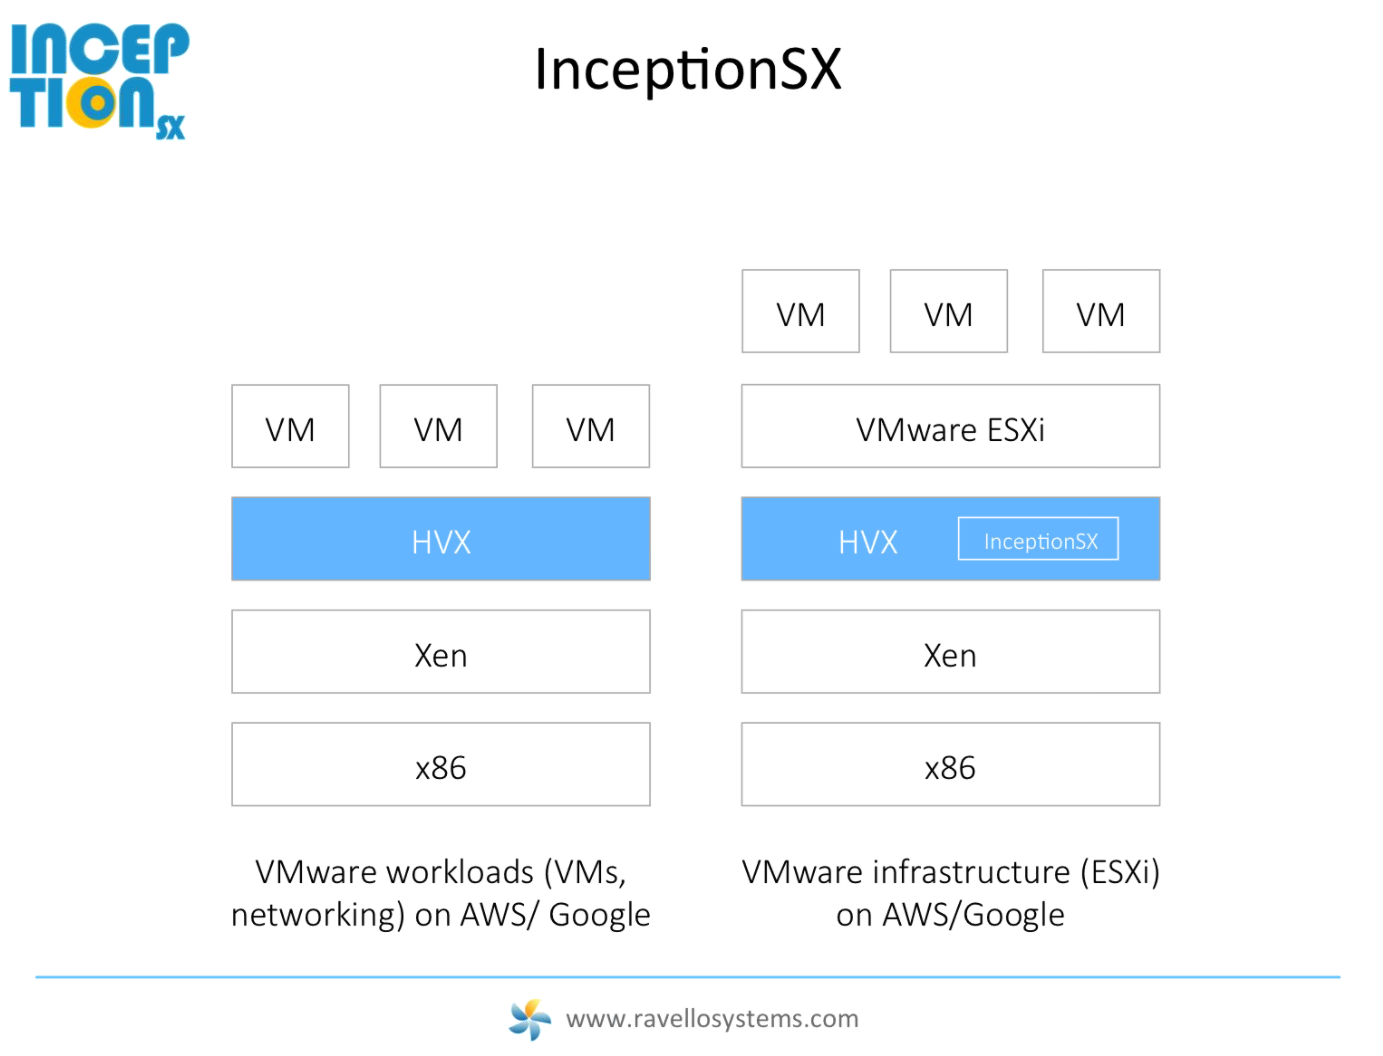 Where Inception SX fits in the stack